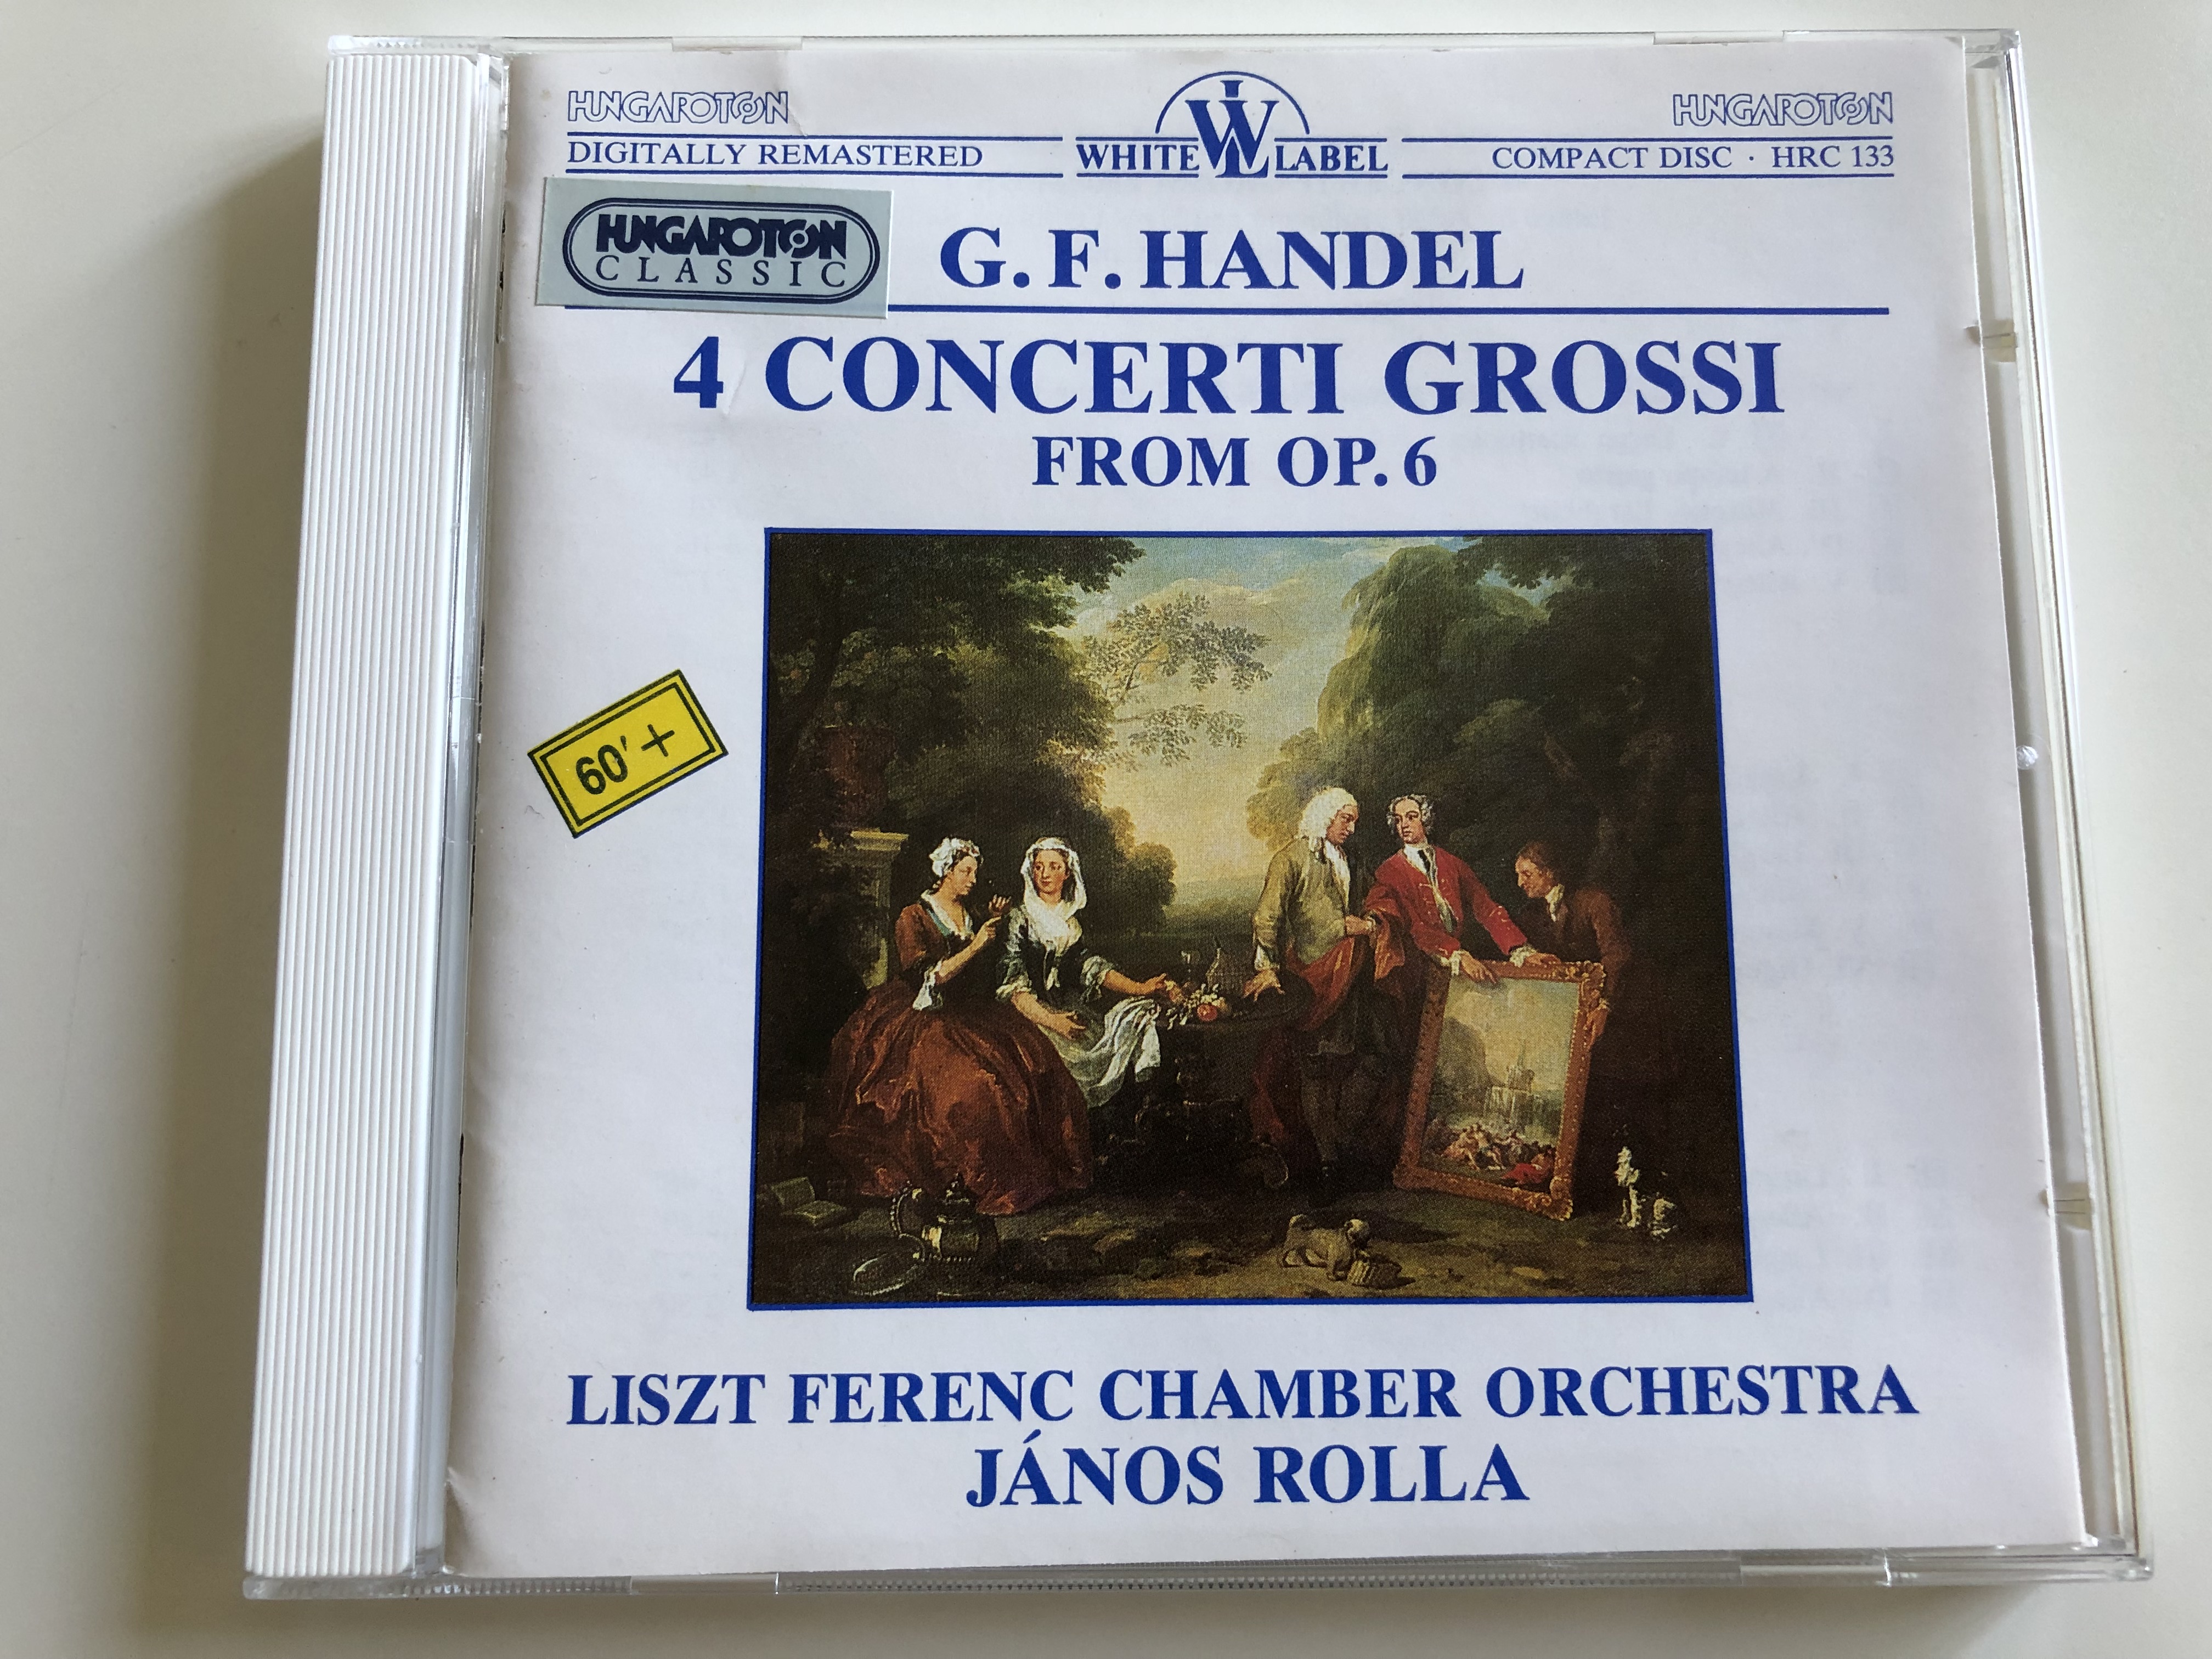 g.-f.-handel-4-concerti-grossi-from-op.6-liszt-ferenc-chamber-orchestra-budapest-conducted-by-j-nos-rolla-hungaroton-white-label-audio-cd-1989-hrc-133-1-.jpg